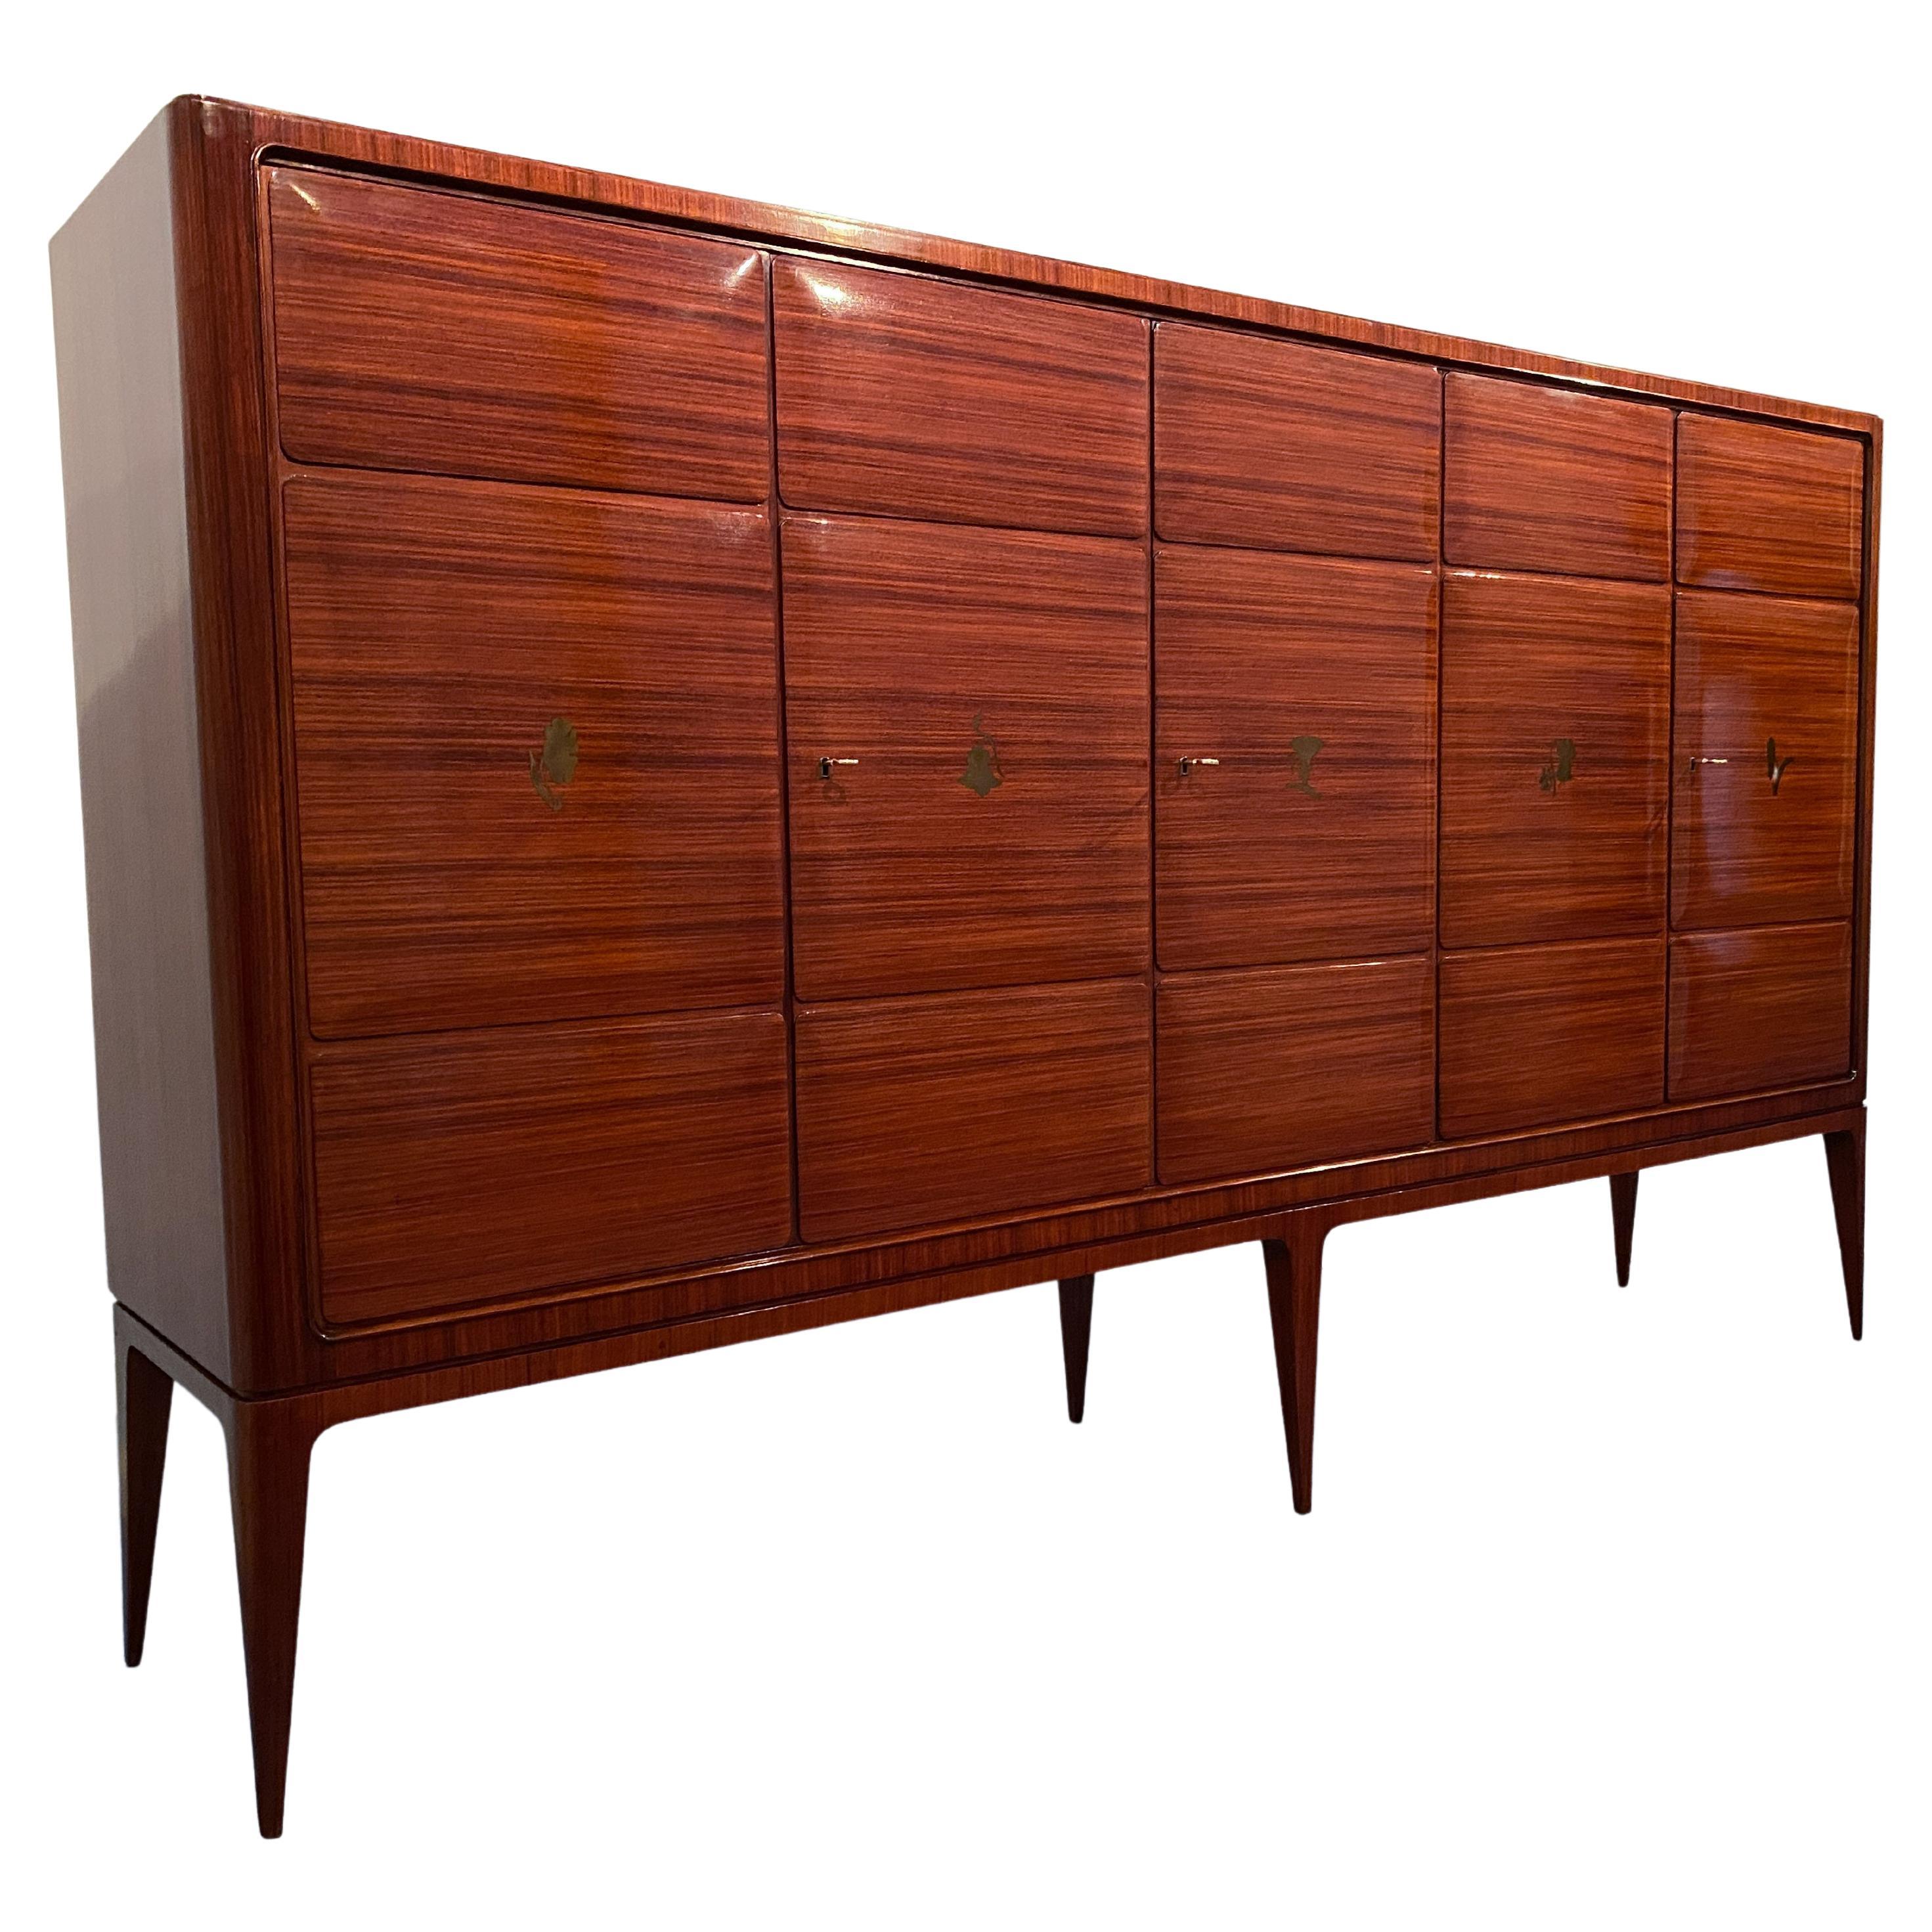 Magnificent Italian sideboard designed by Paolo Buffa in the 50s. Underlining the upper floor is wood veneer arranged in a herringbone pattern. The doors have three panels each embellished with a splendid brass inlay with floral motifs. The lower